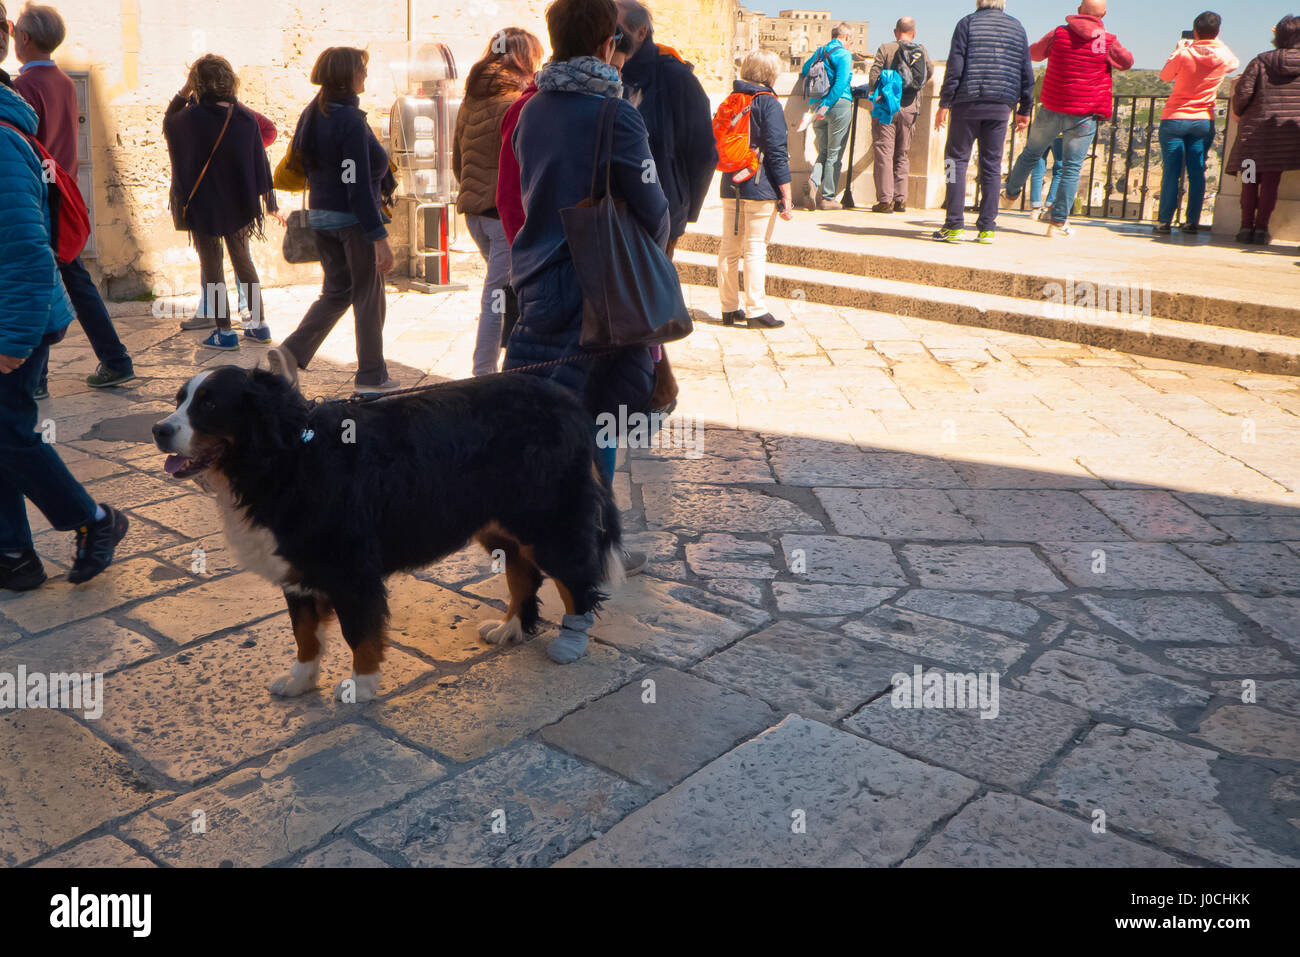 A dog among people in a italian city famous. Stock Photo